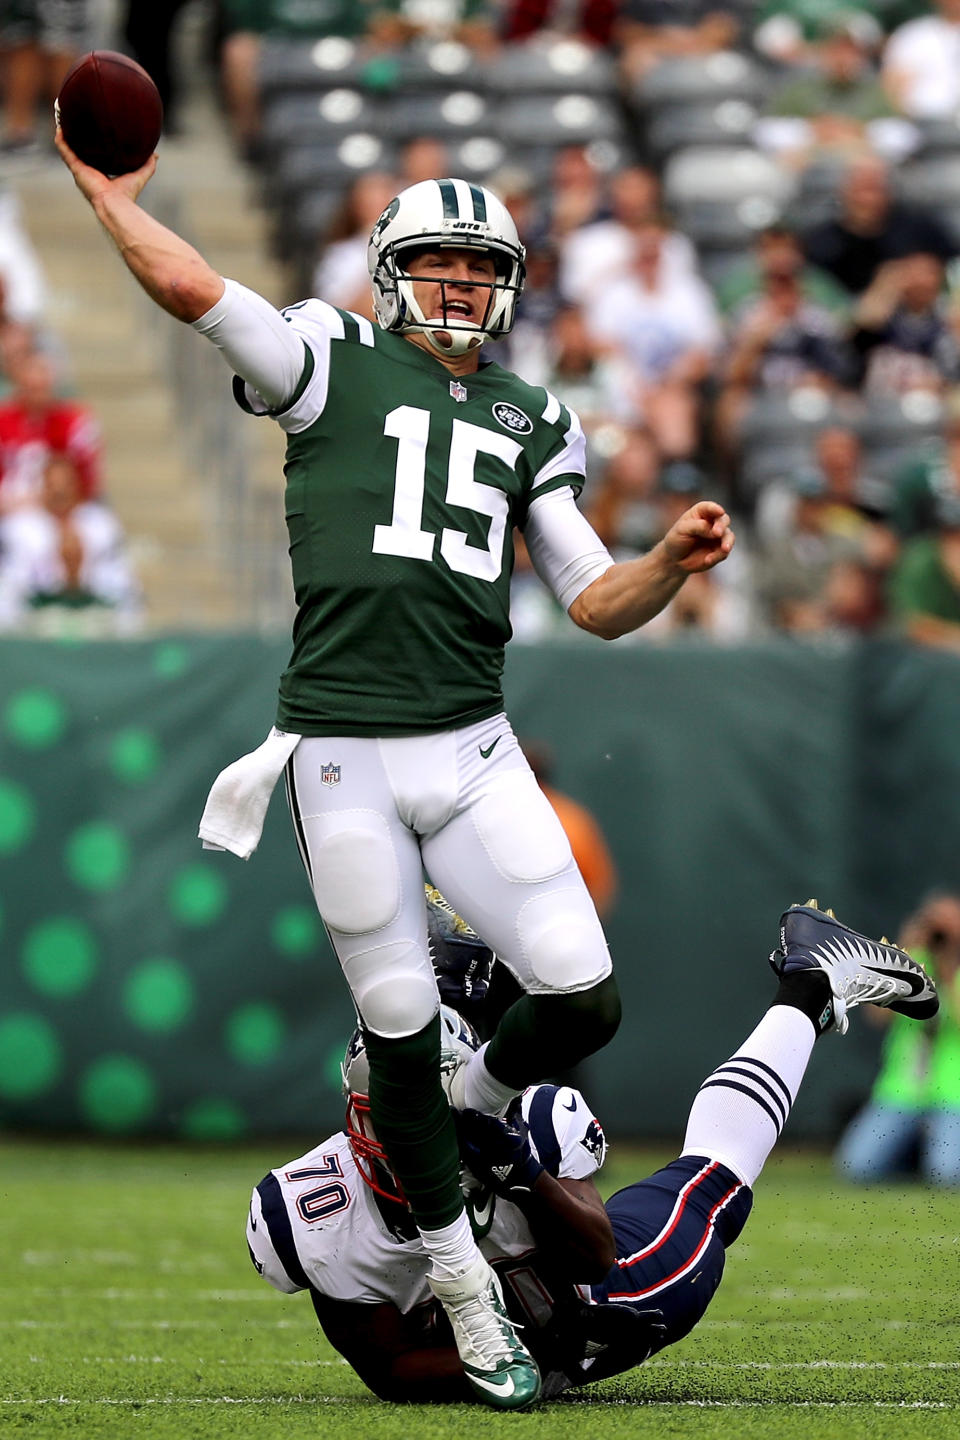 <p>Josh McCown #15 of the New York Jets thows the ball in the first quarter against the New England Patriots during their game at MetLife Stadium on October 15, 2017 in East Rutherford, New Jersey. (Photo by Abbie Parr/Getty Images) </p>